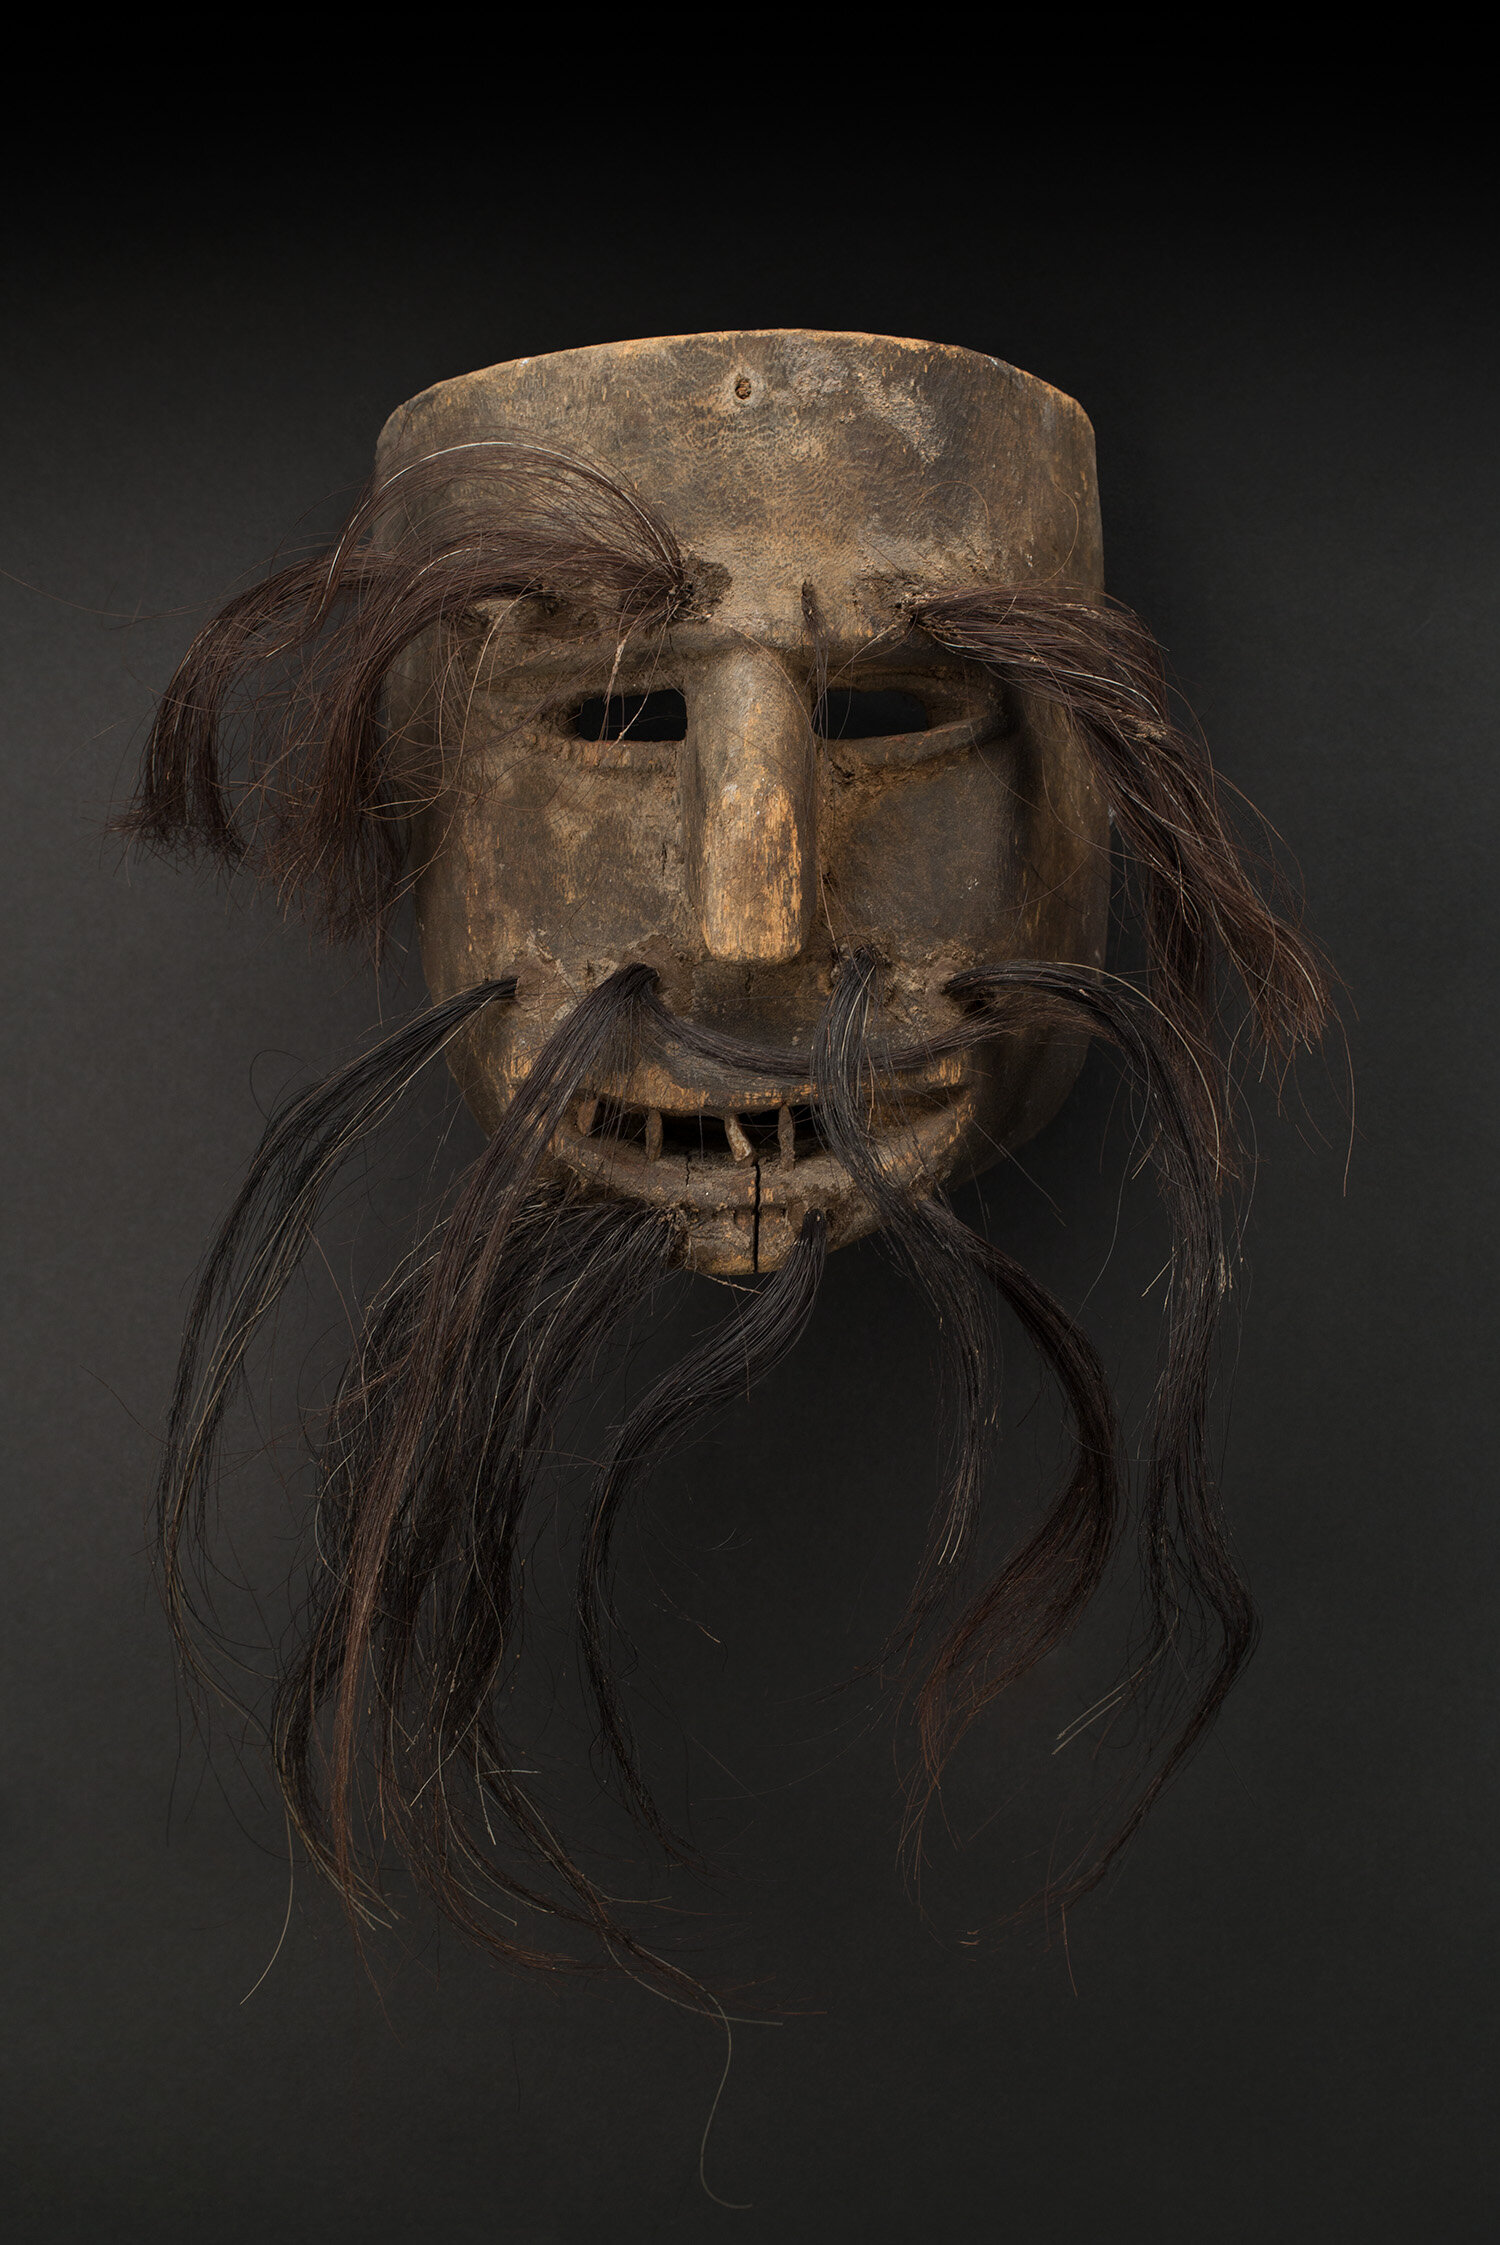 19th Century Mexican Mask on its Stand M2152 – Early California